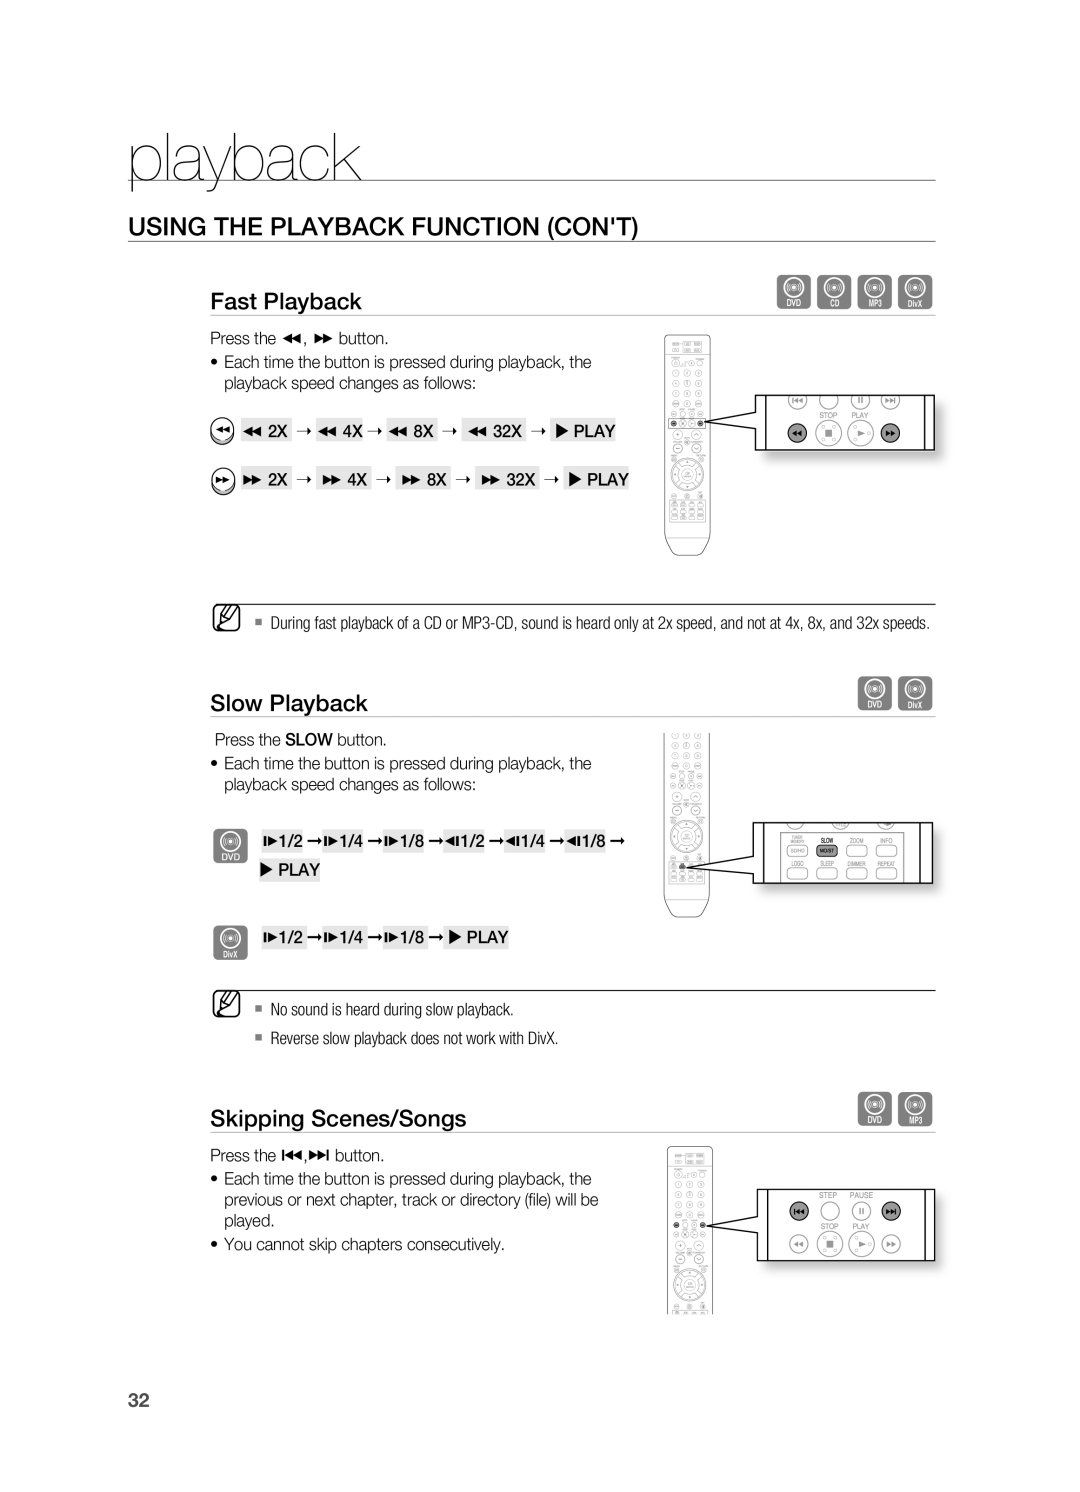 Sony HT-X810 user manual USING THE PlAYBACK FUNCTION CONT, Slow Playback, Skipping Scenes/Songs, playback, Fast Playback 